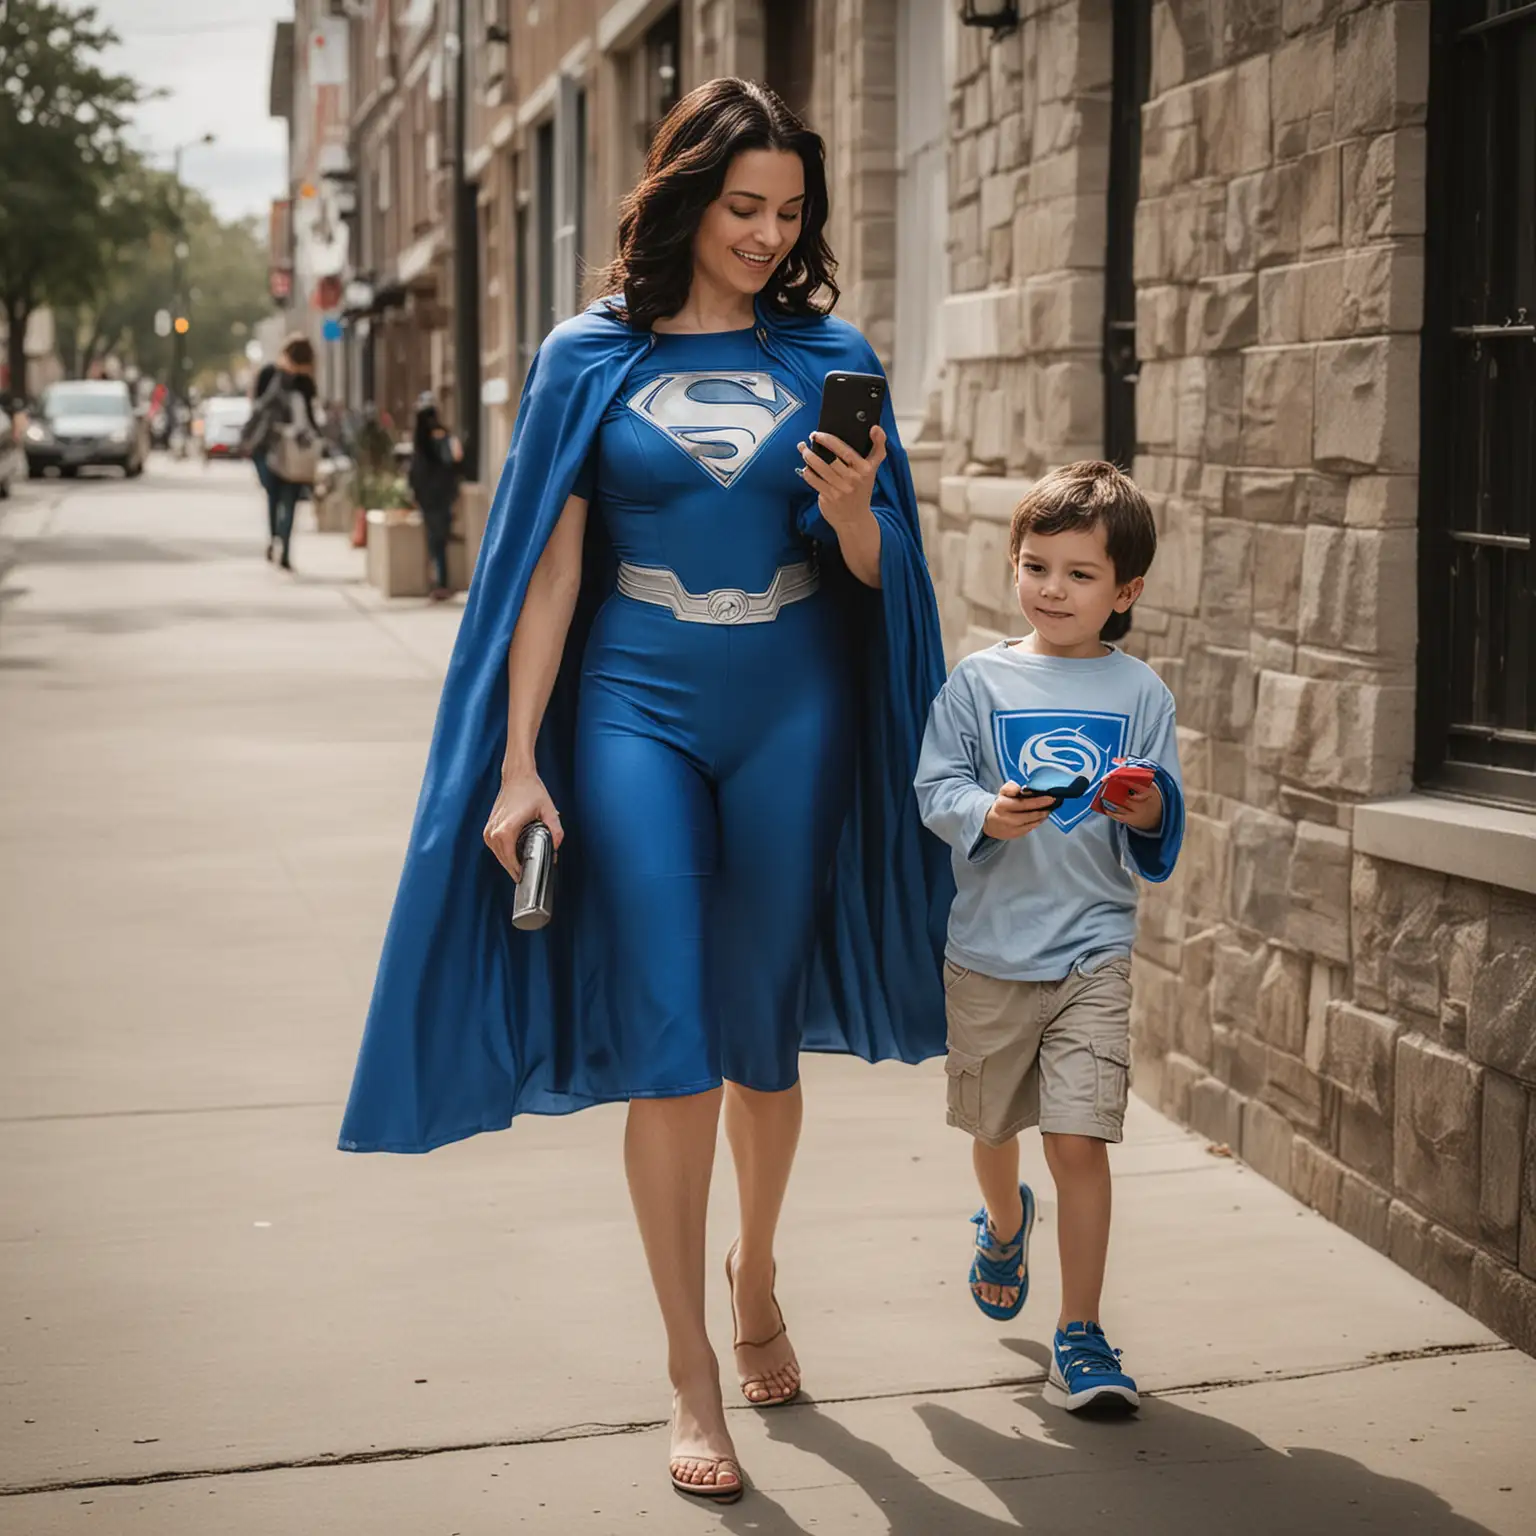 Mother Wearing Blue Superhero Cape Walking with Son While Checking Cell Phone